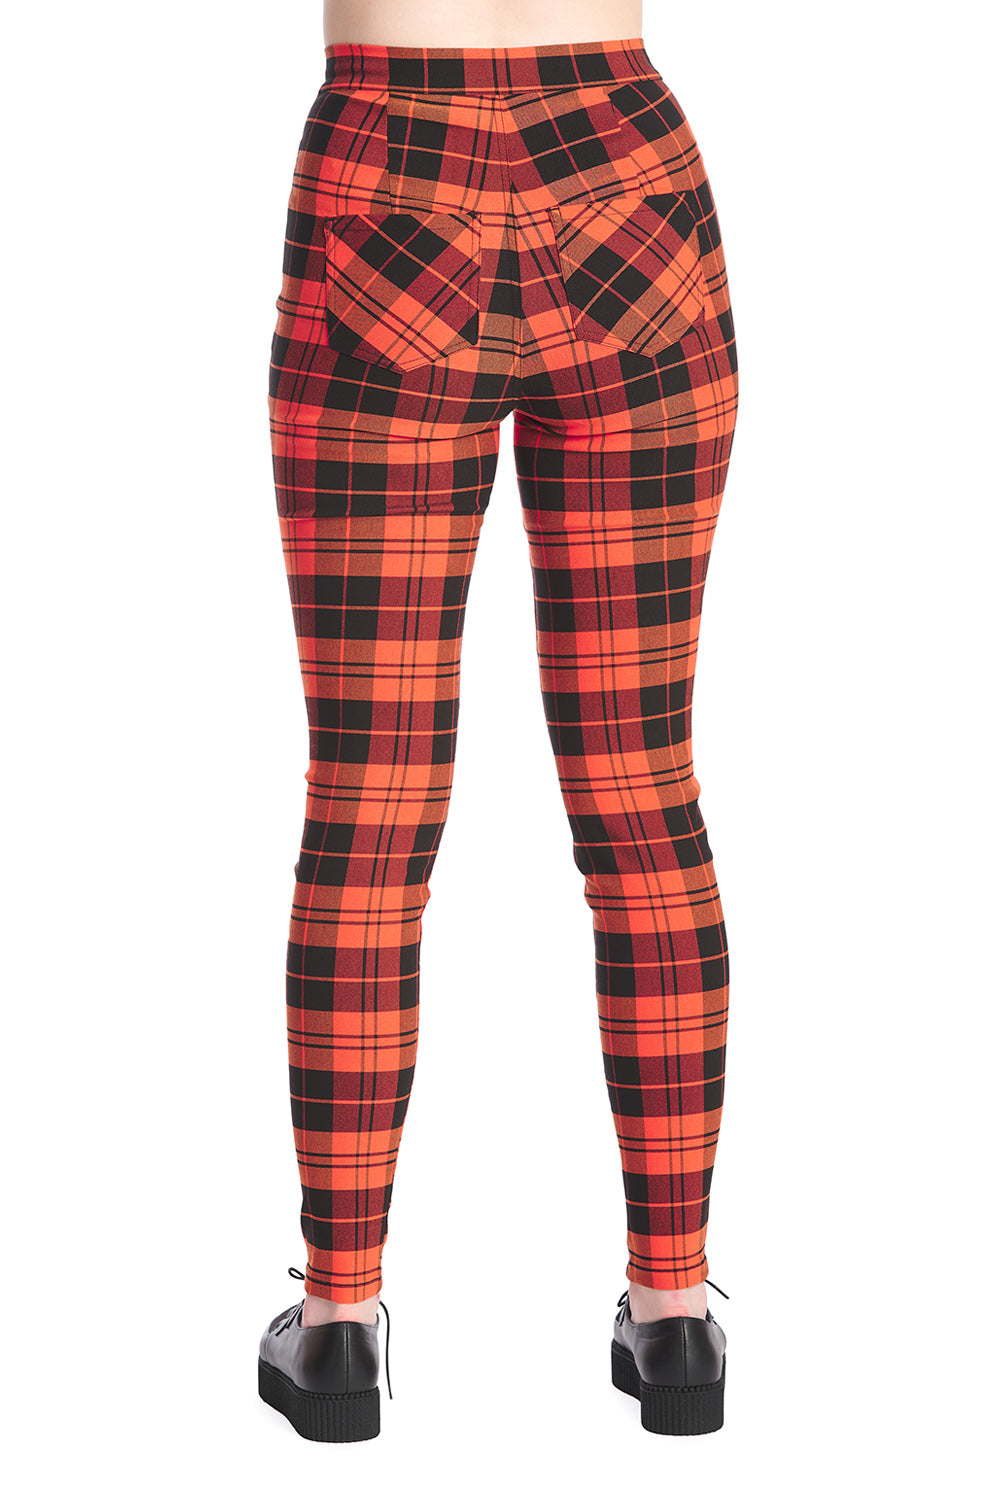 High waisted black and orange tartan trousers with front zip and pentagram pendants